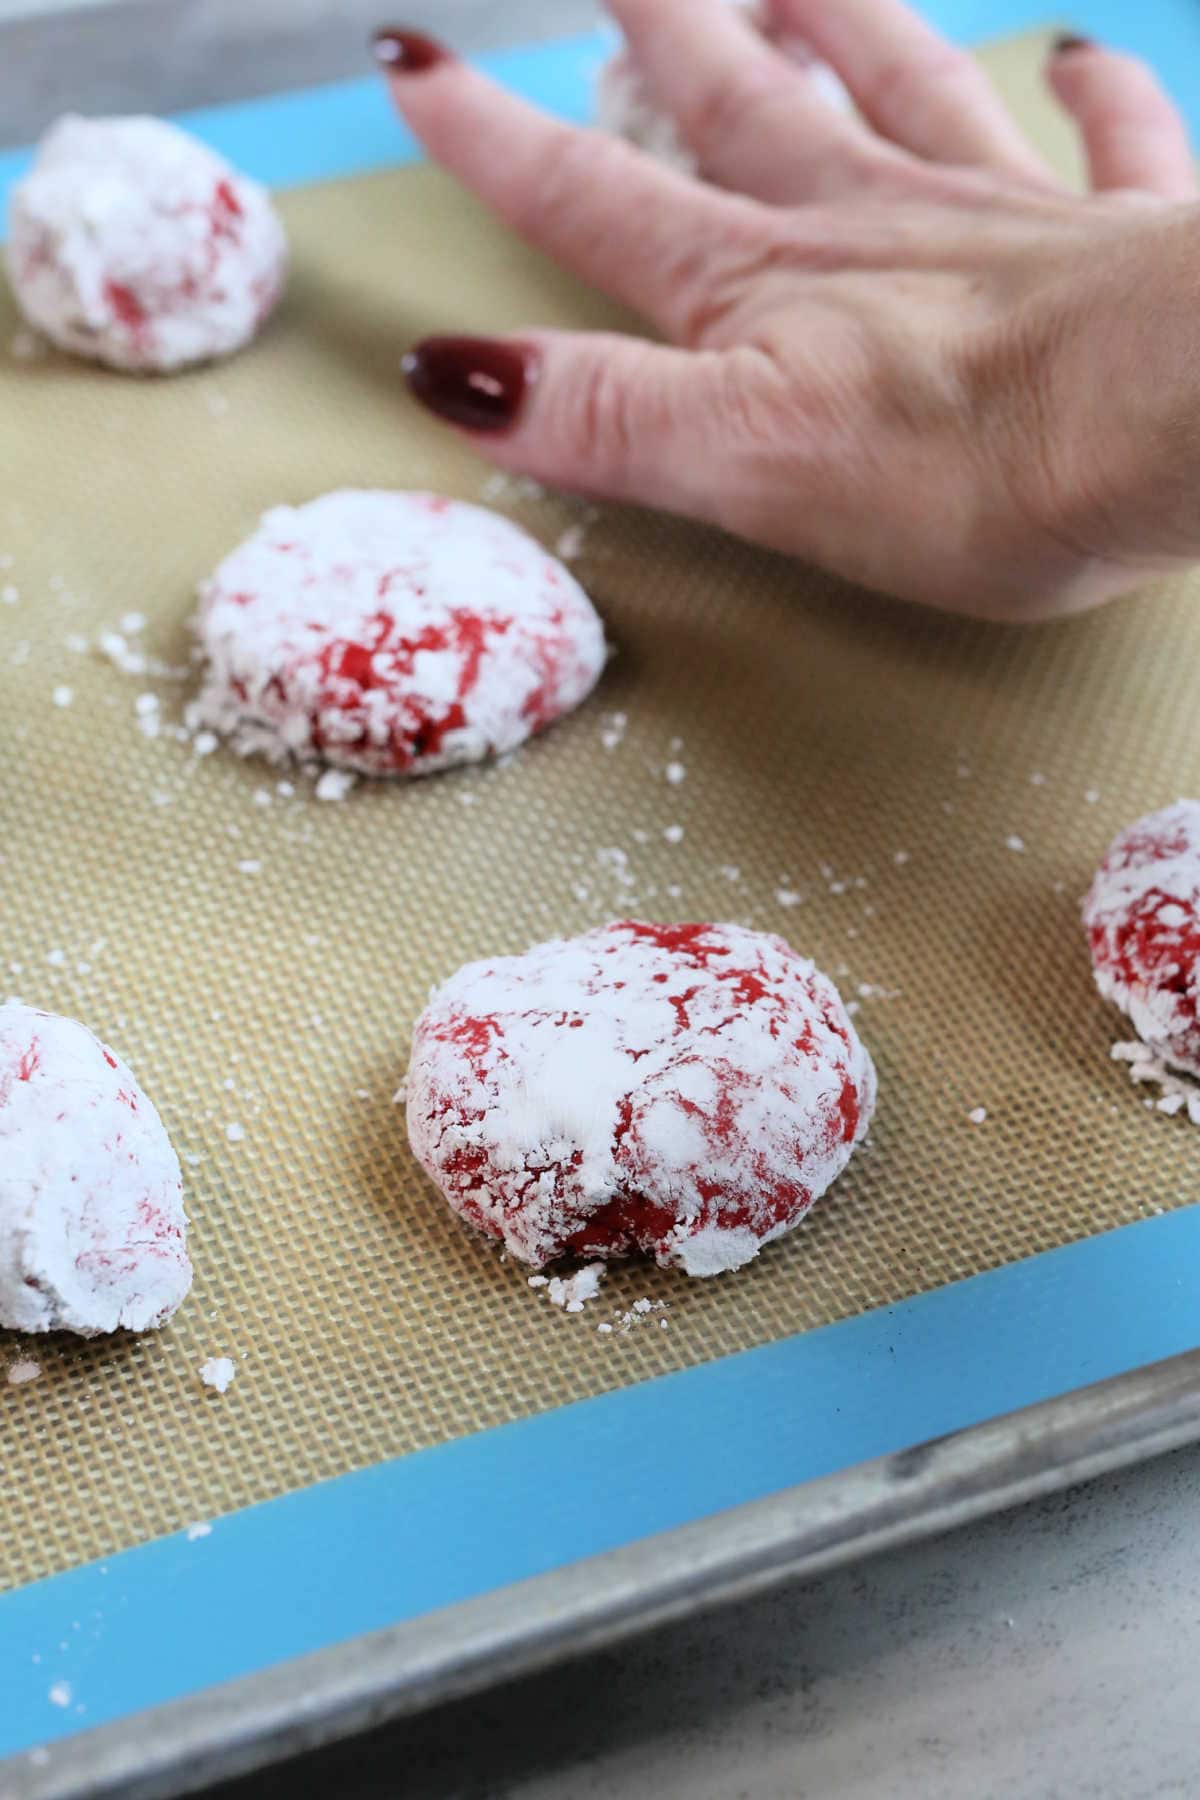 hand pressing down red Christmas crinkle cookie to give it a crackle effect